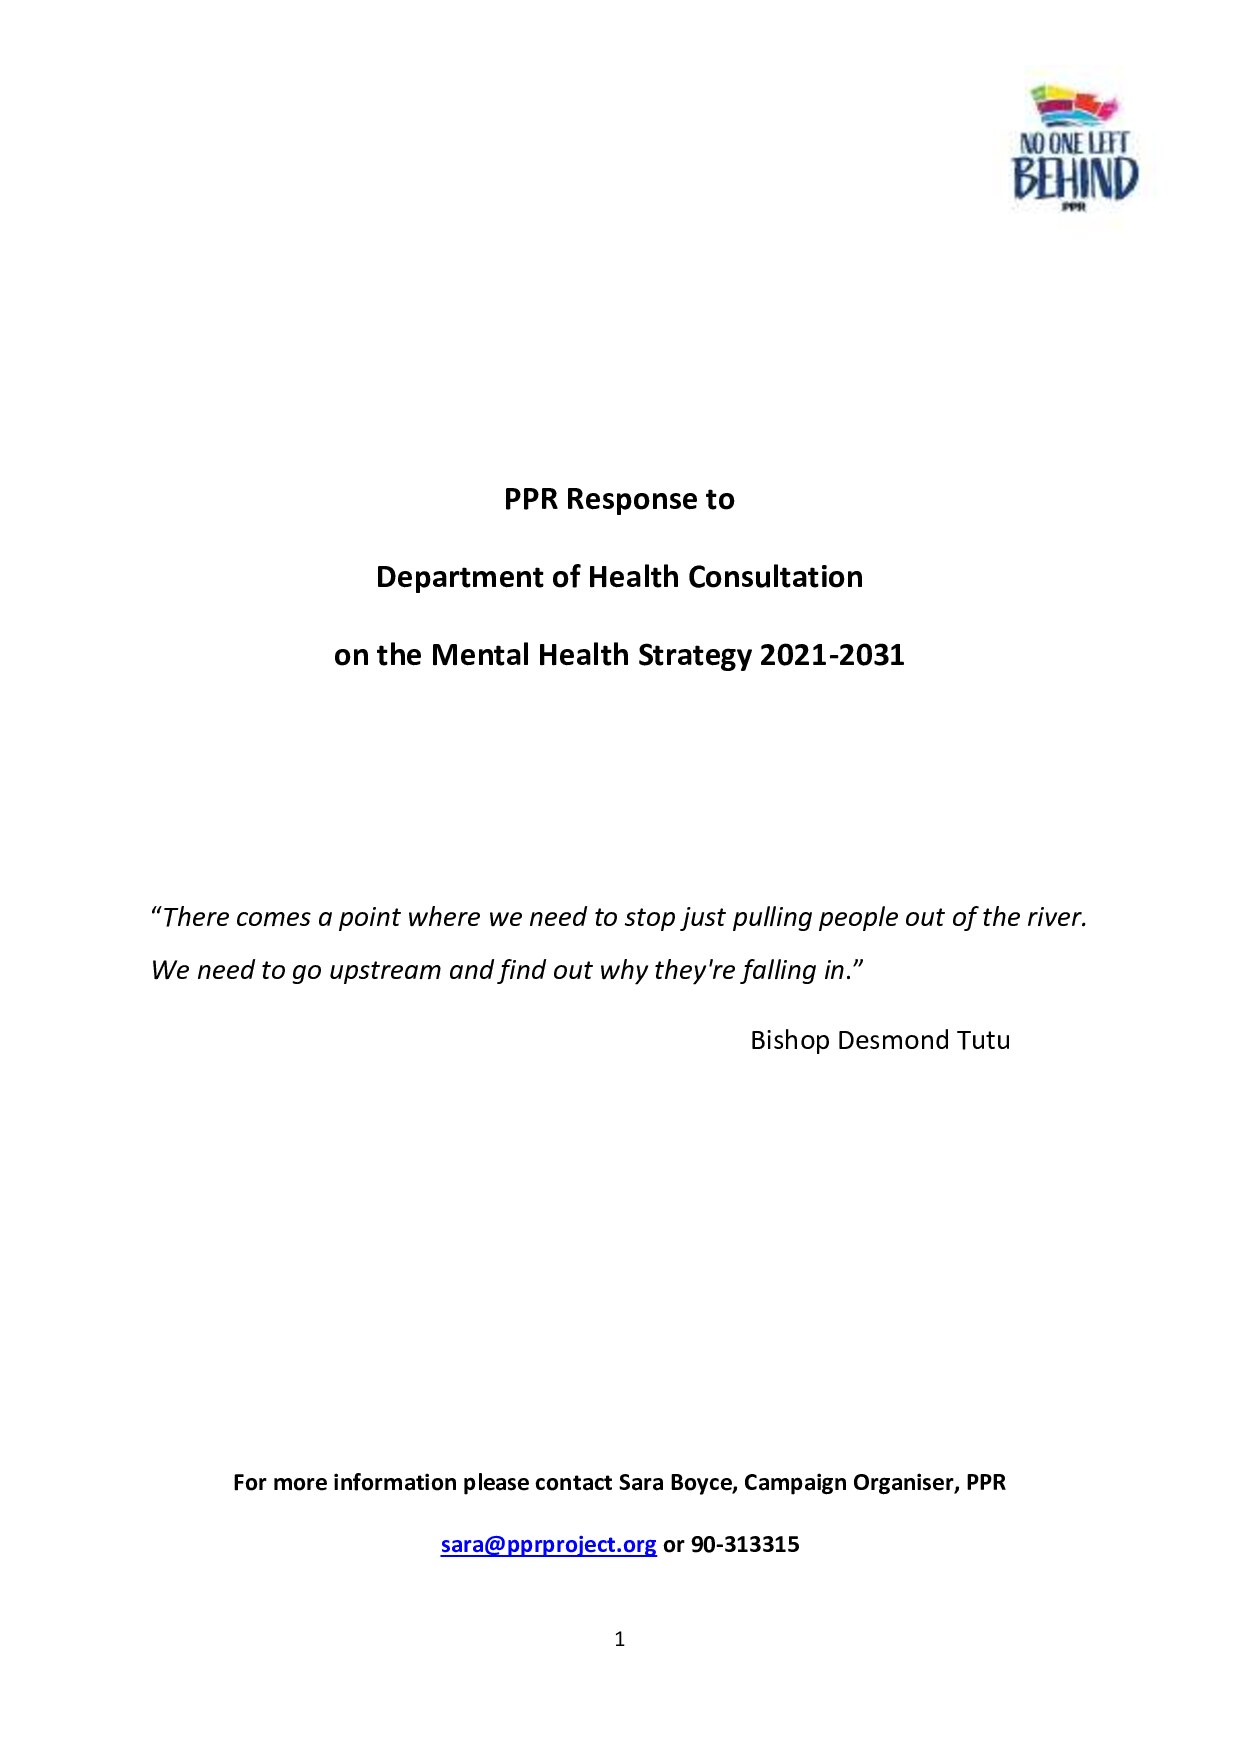 PPR Response to Department of Health's Consultation on its 10 Year Mental Health Strategy